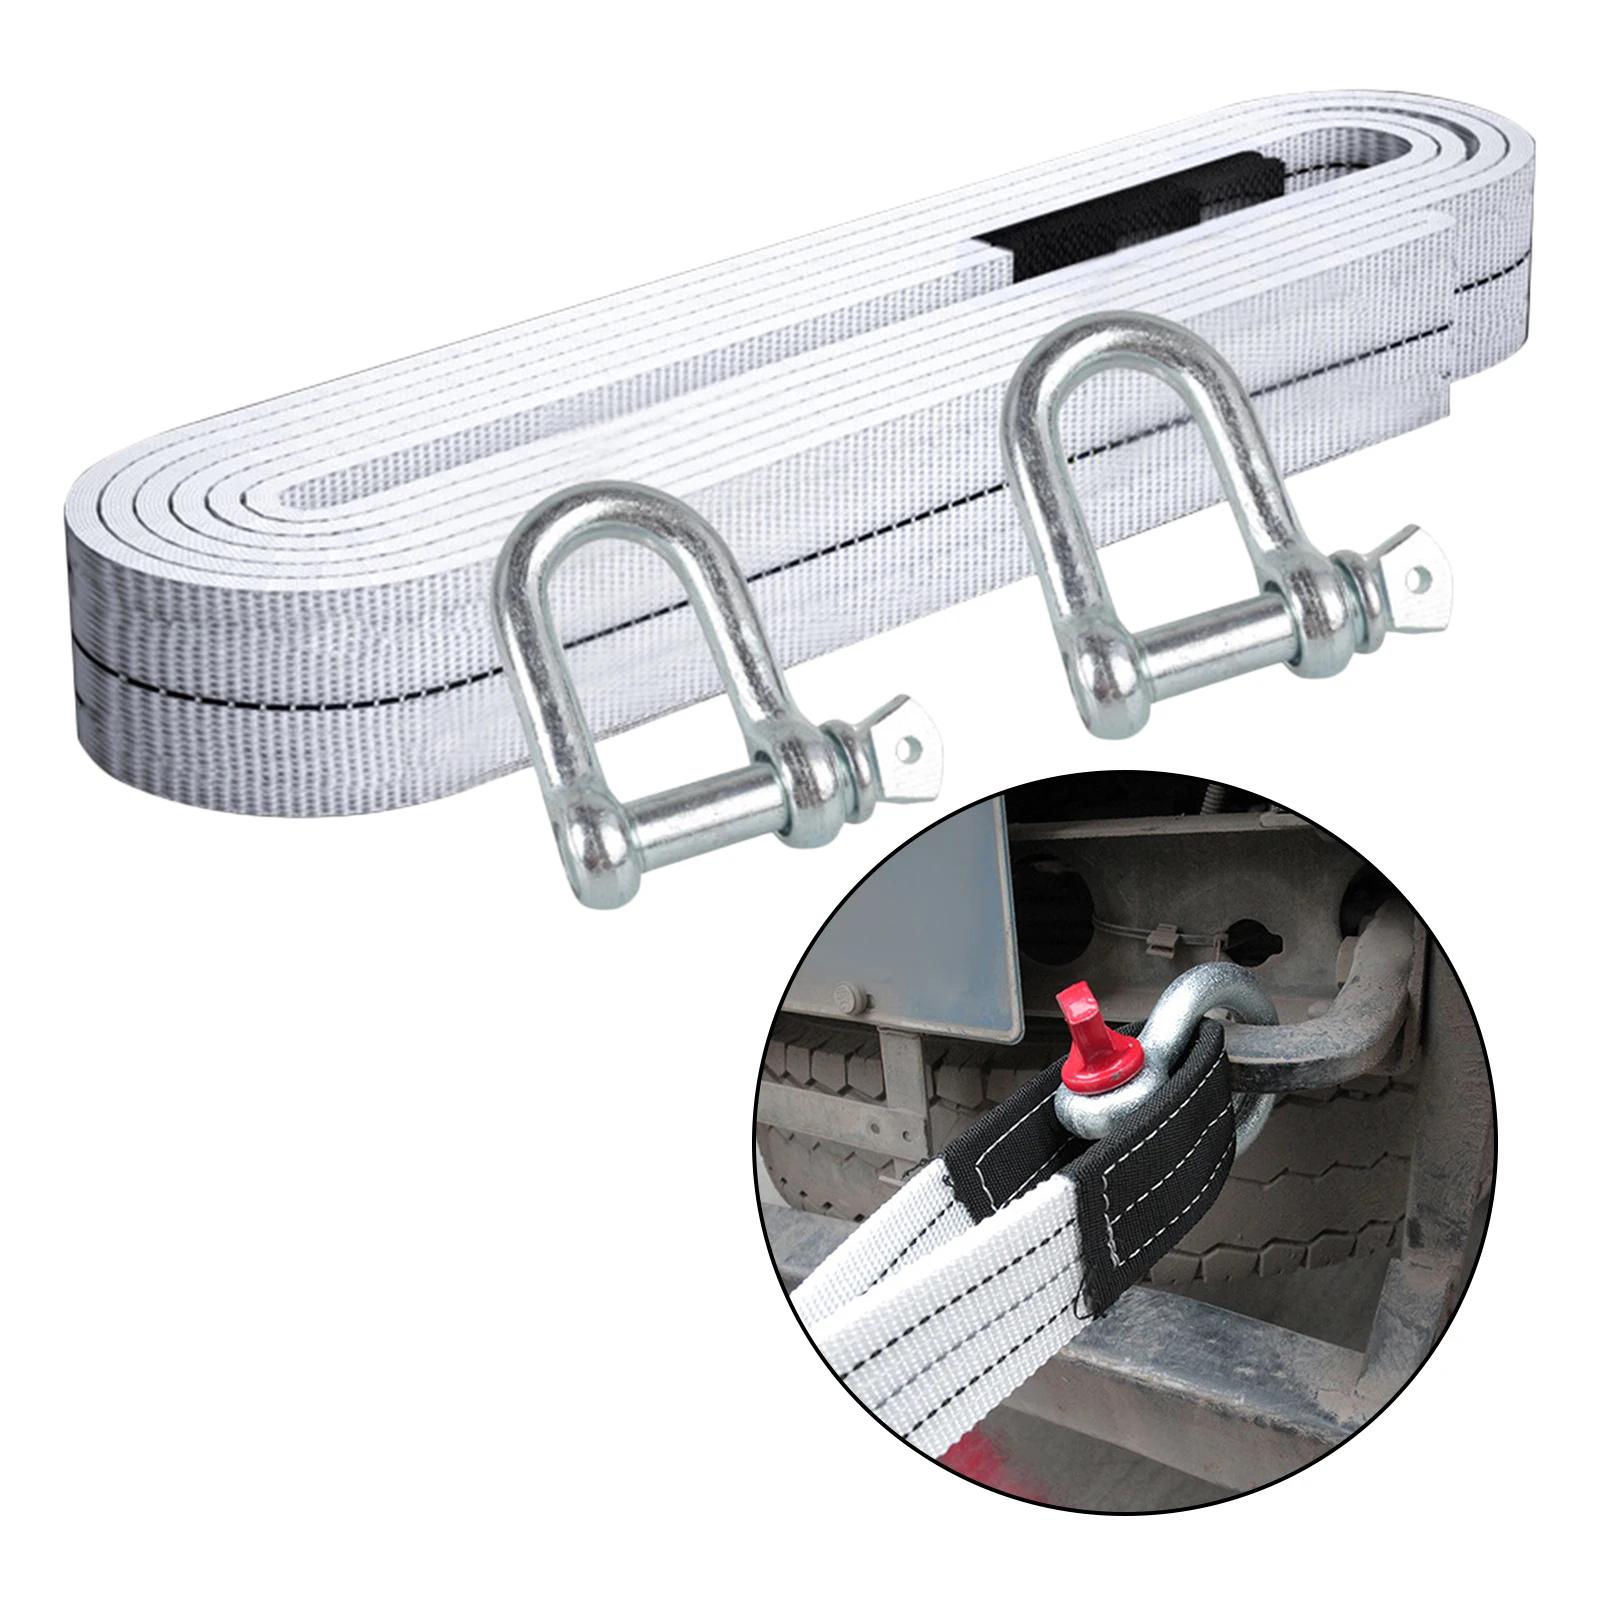 Trailer Winch Replacement Strap and Safety Hook for Large Boats, , , Towing, Heavy Duty Equipment or Flat Bed 